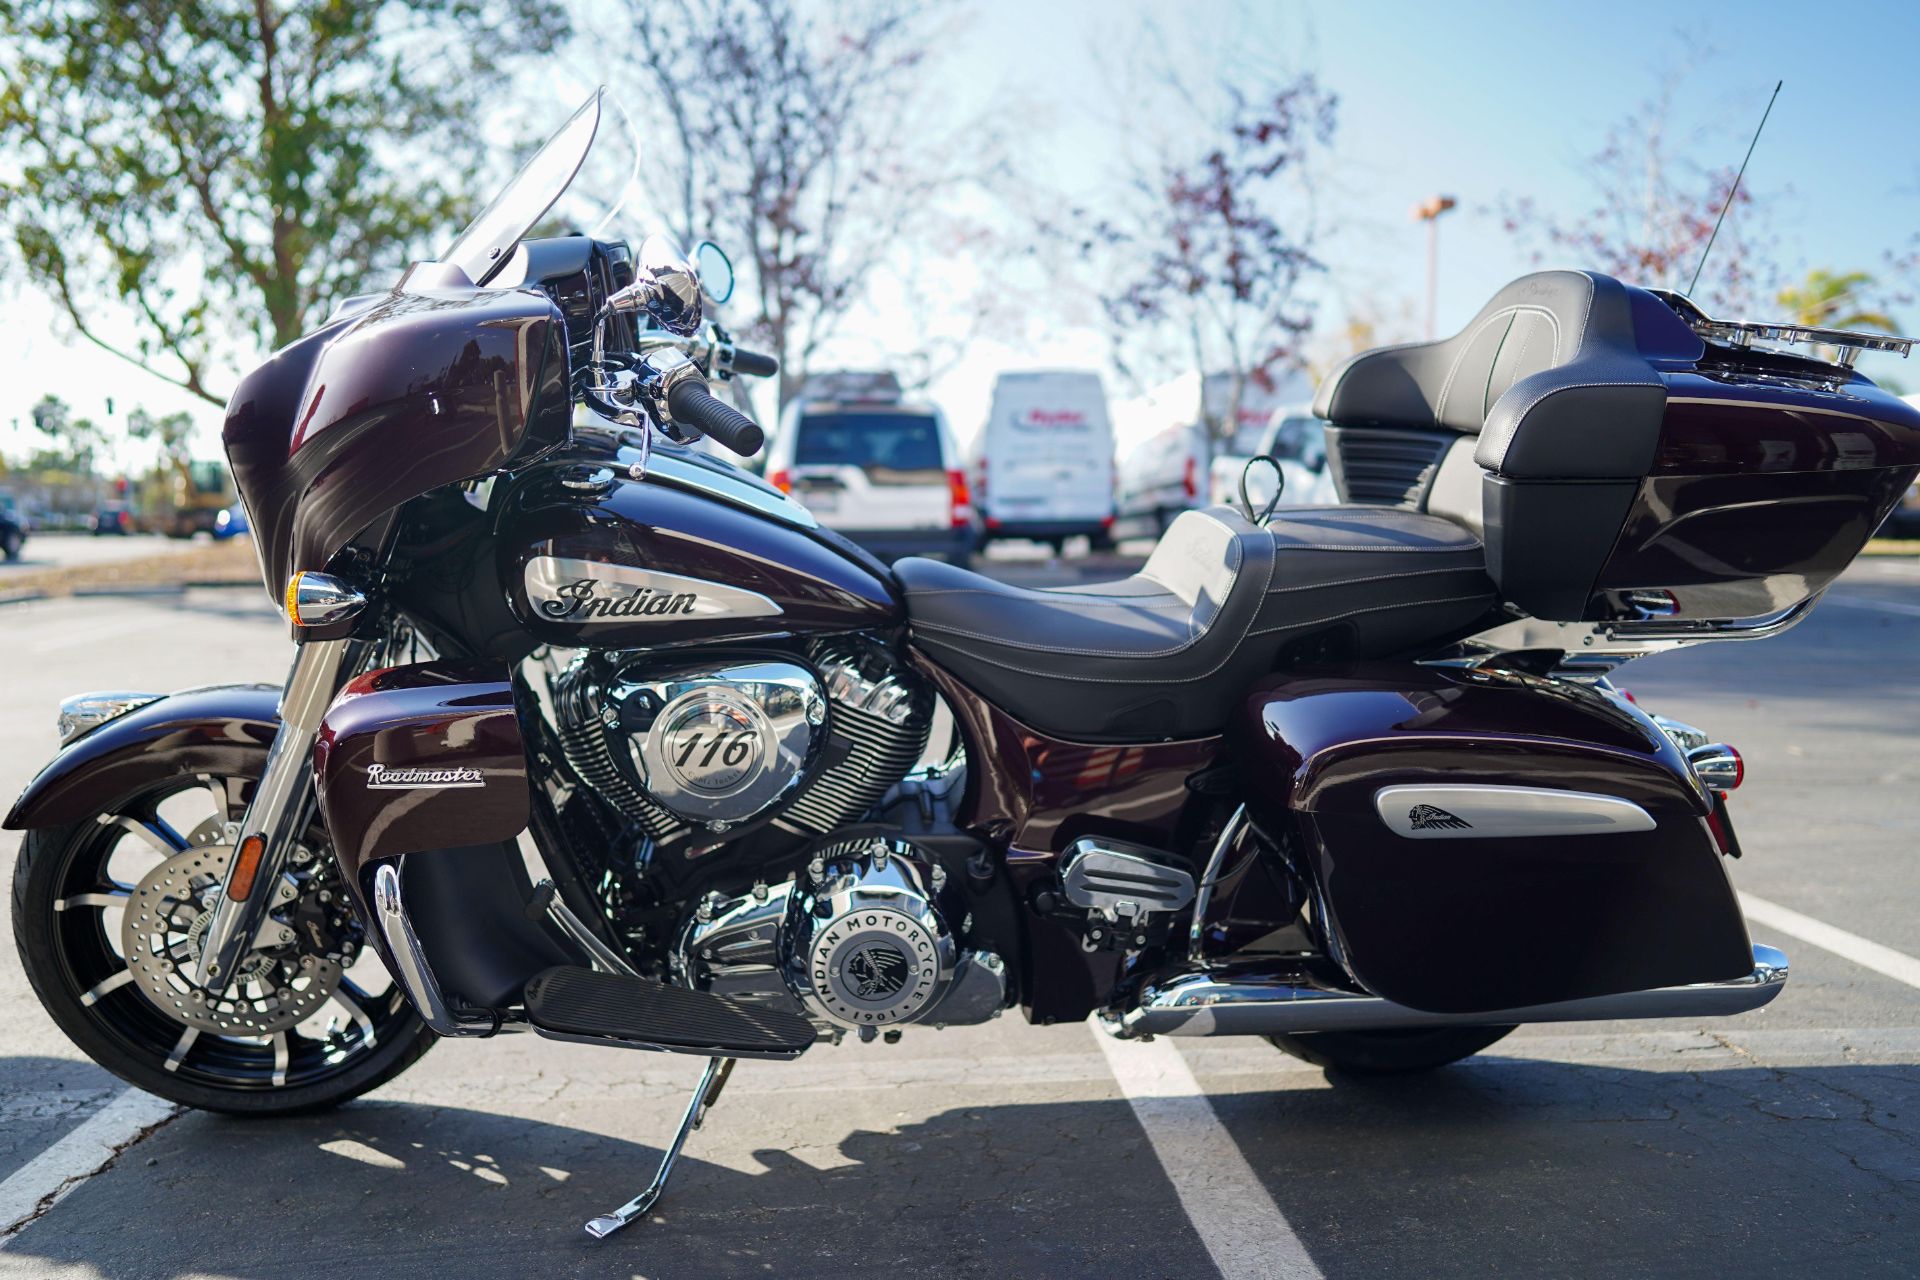 2022 Indian Roadmaster® Limited in San Diego, California - Photo 4